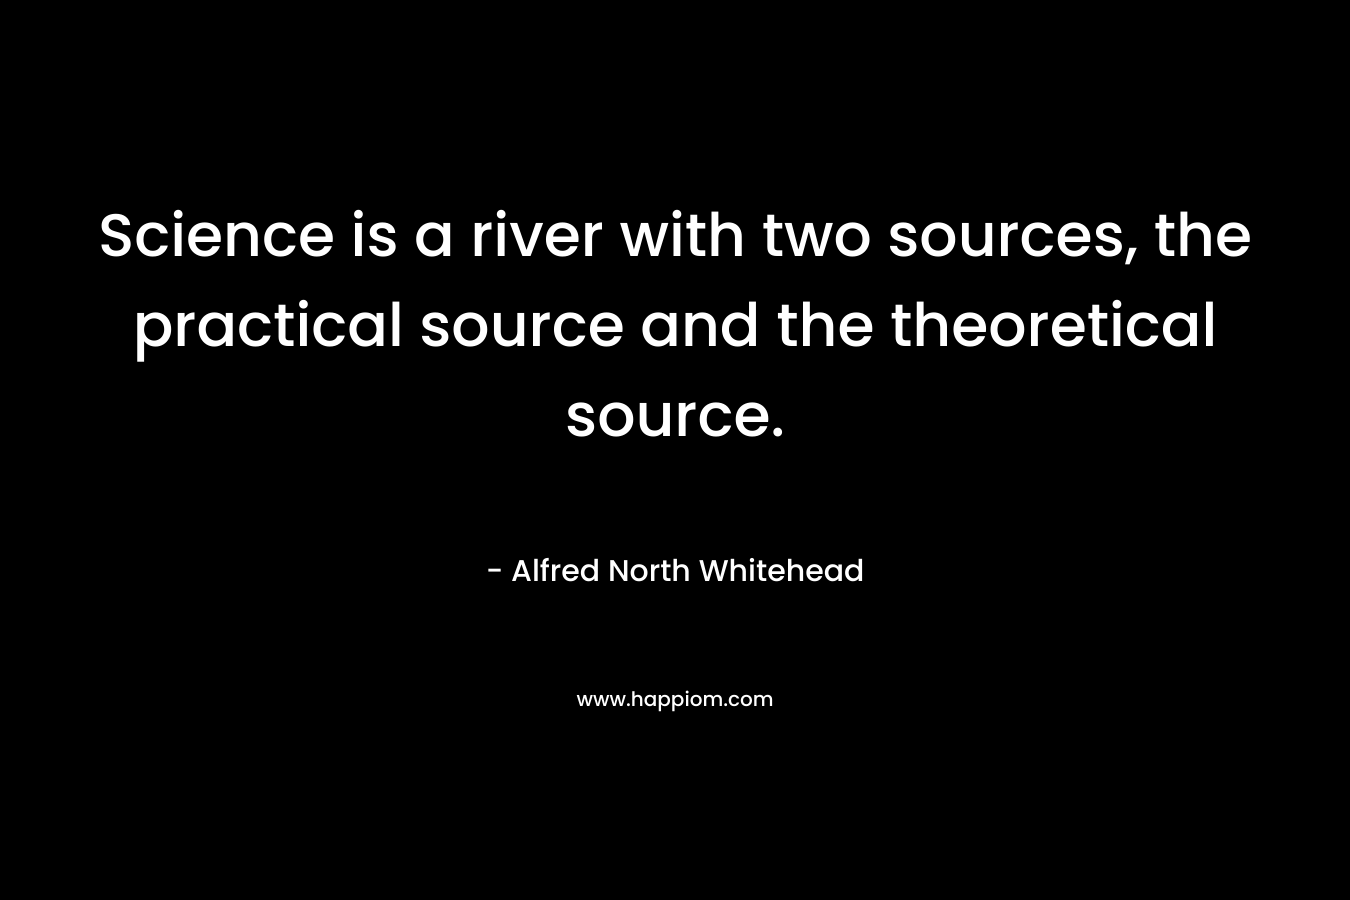 Science is a river with two sources, the practical source and the theoretical source. – Alfred North Whitehead